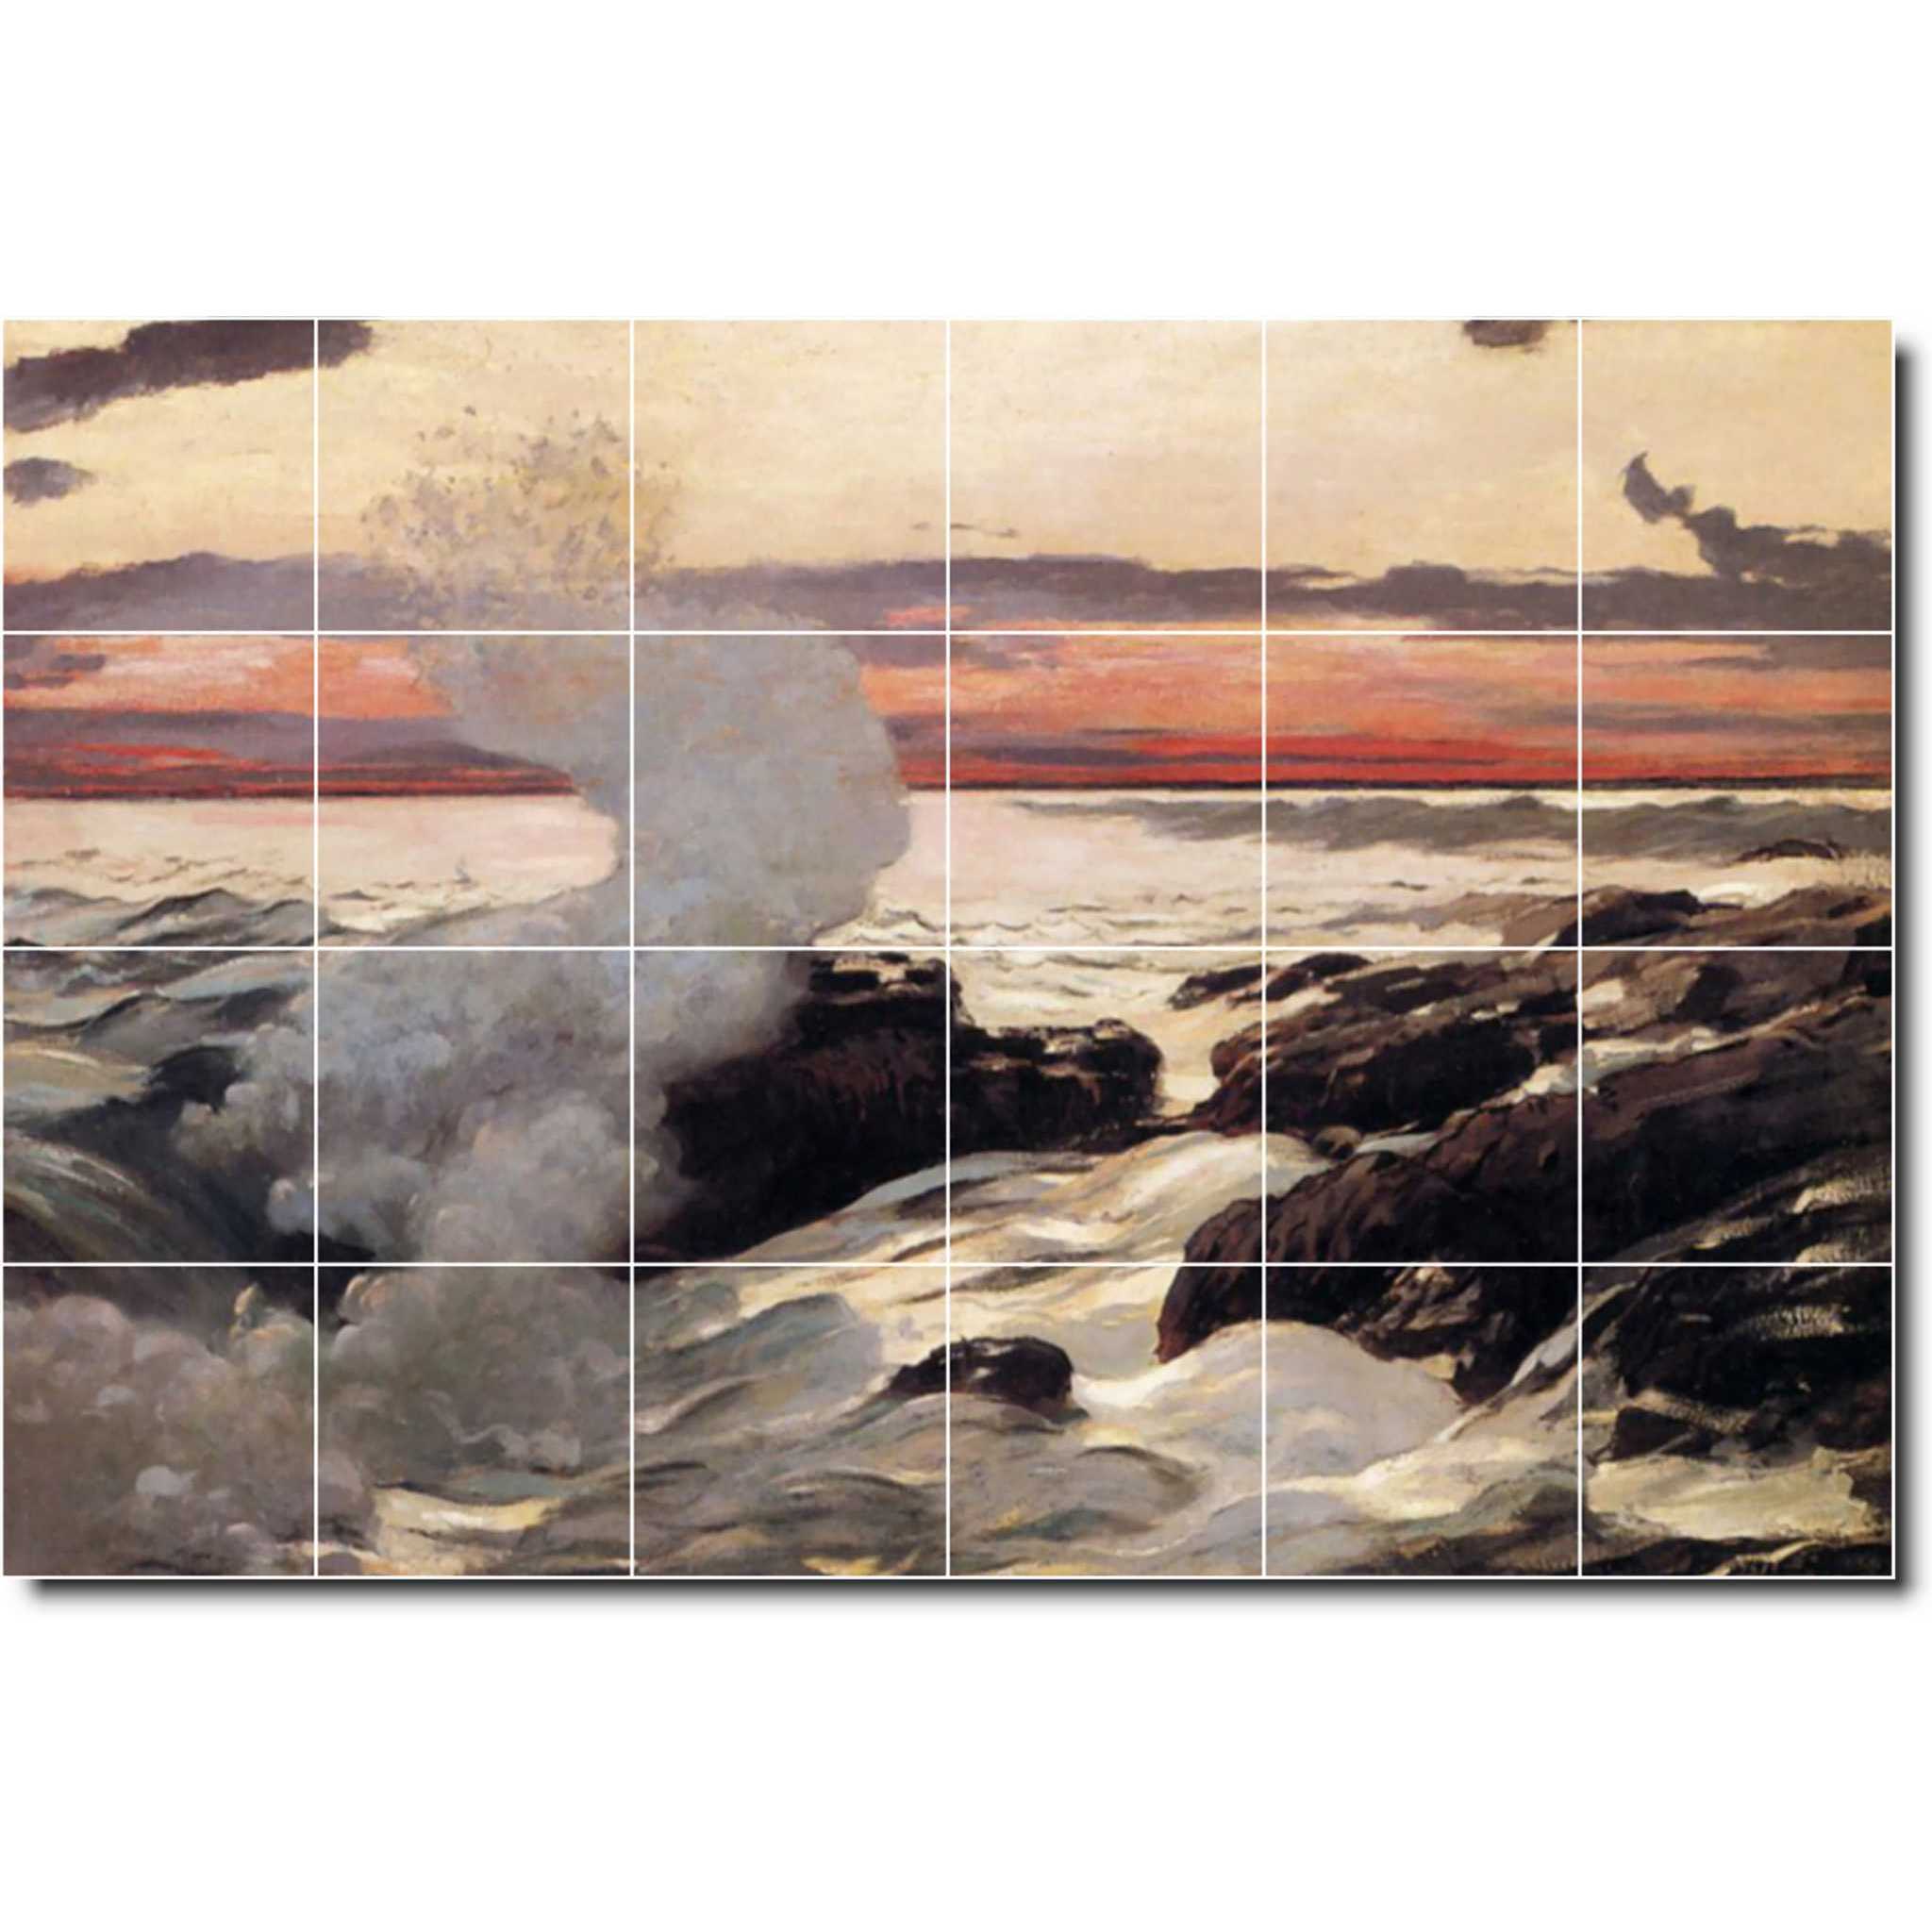 Winslow Homer Waterfront Painting Ceramic Tile Mural P04530-XL. 72"W x 48"H (24) 12x12 tiles